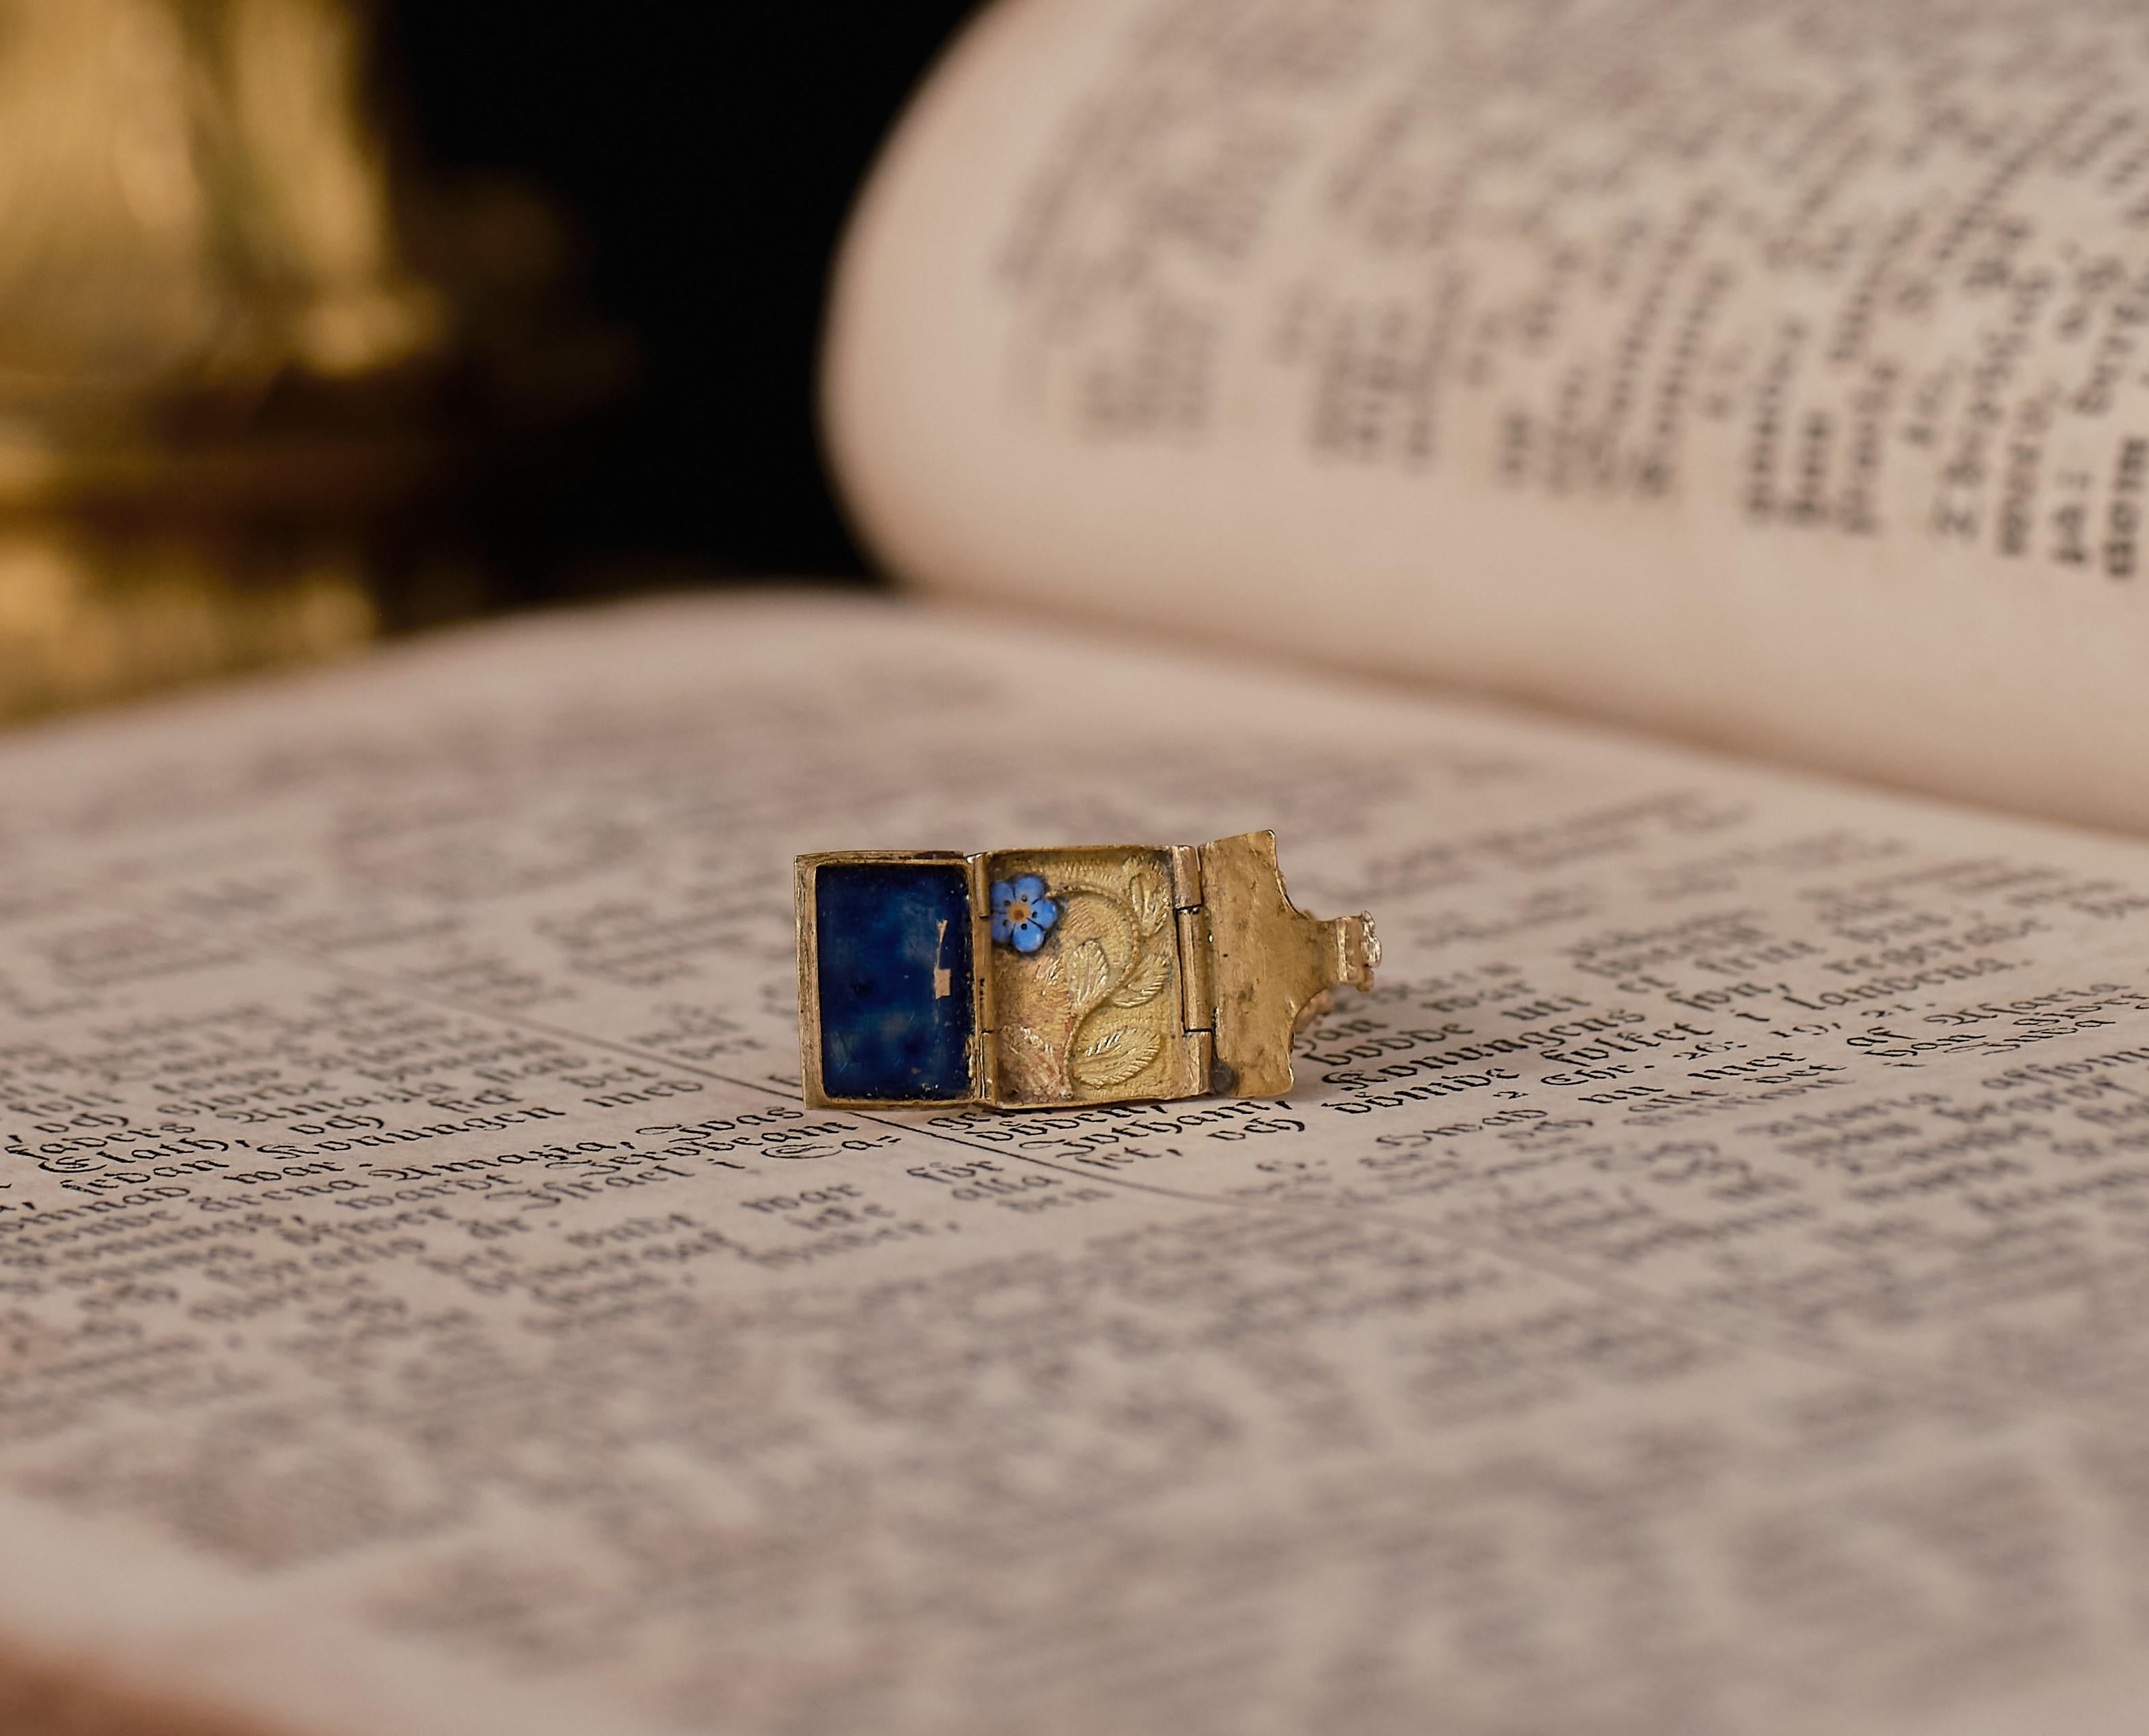 Romantic 19th century Rococo Revival “forget-me-not” remembrance ring 2